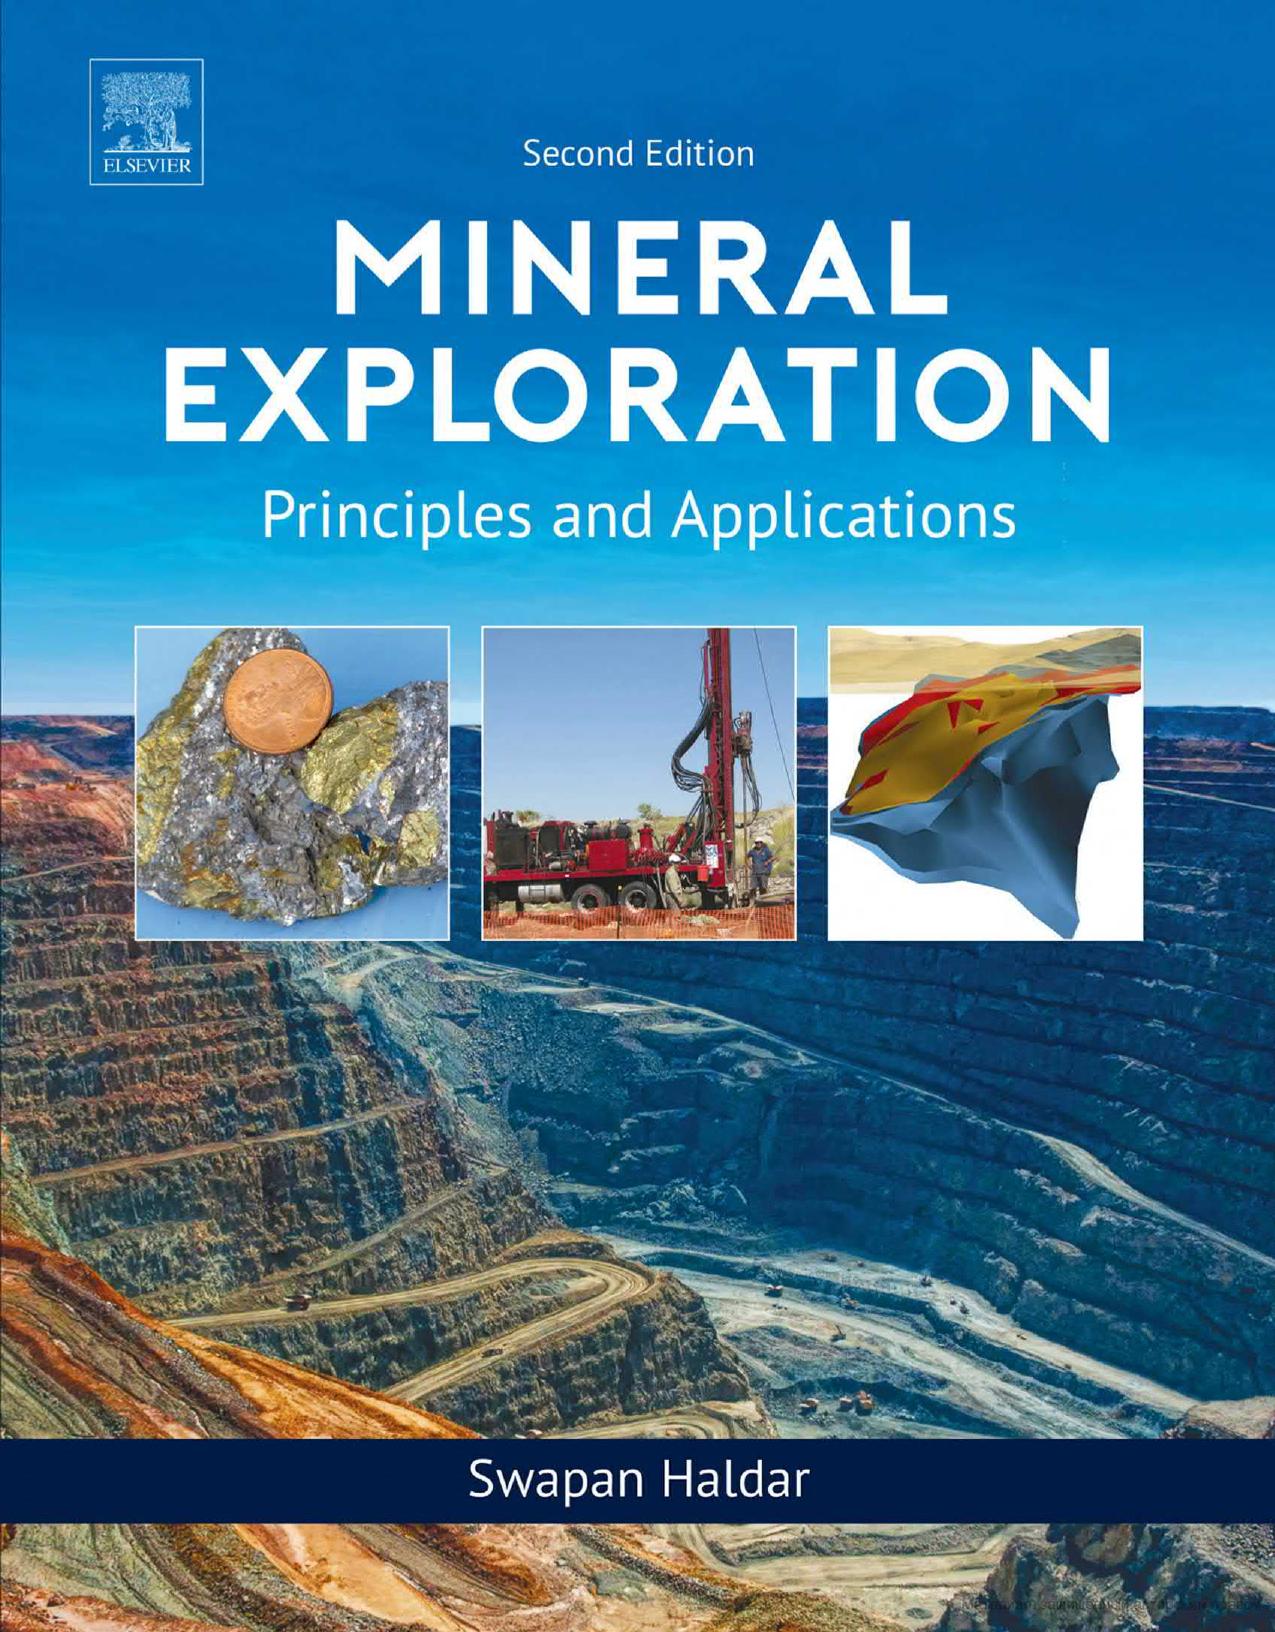 Mineral Exploration: Principles and Applications, Second Edition